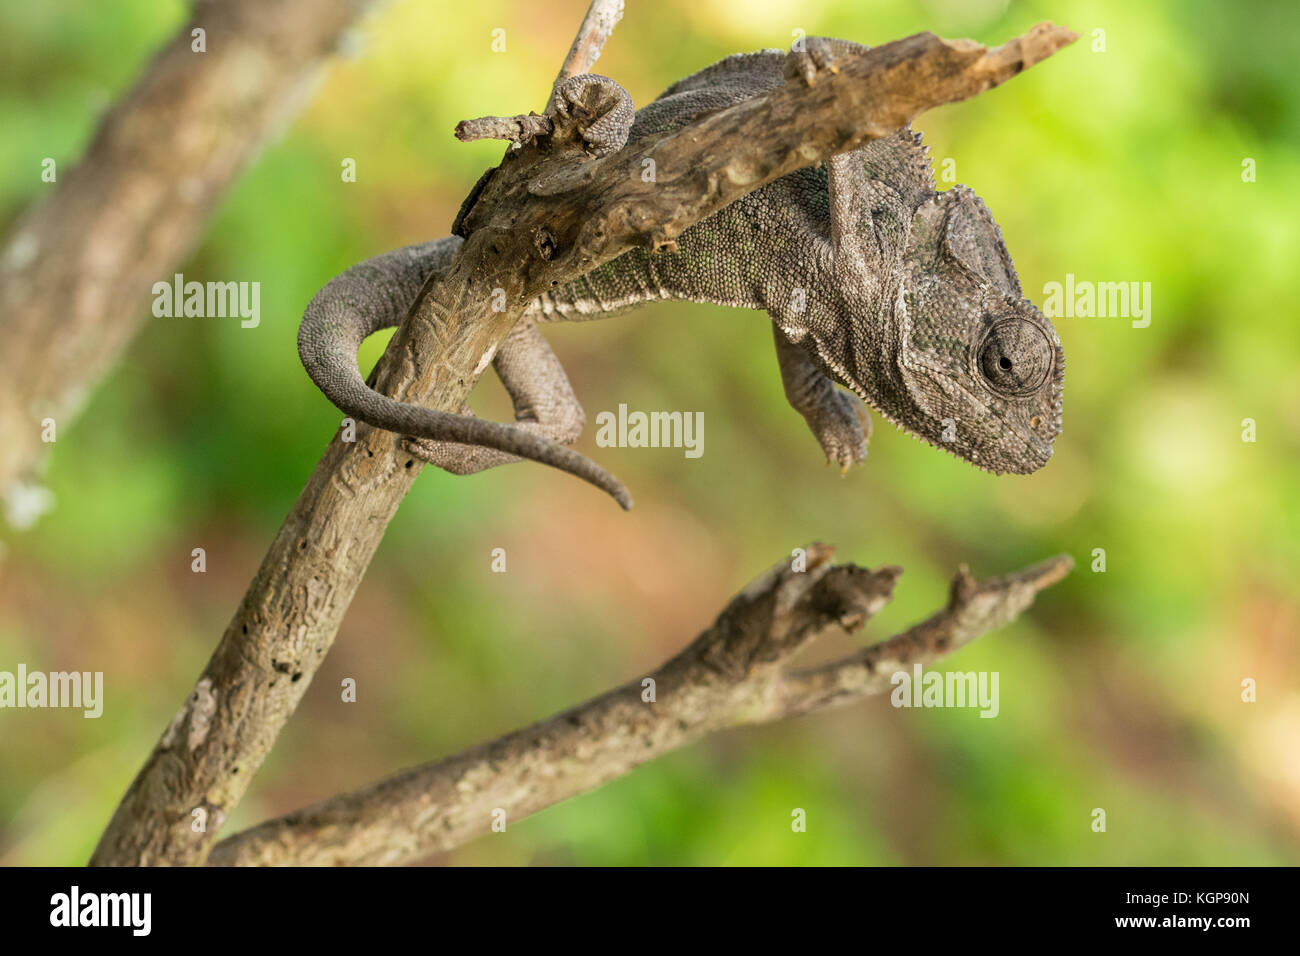 A Mediterranean Chameleon in light grayish brown camouflage holding on to a branch, clawing the stick. Bokeh photography, fauna of Maltese Islands Stock Photo